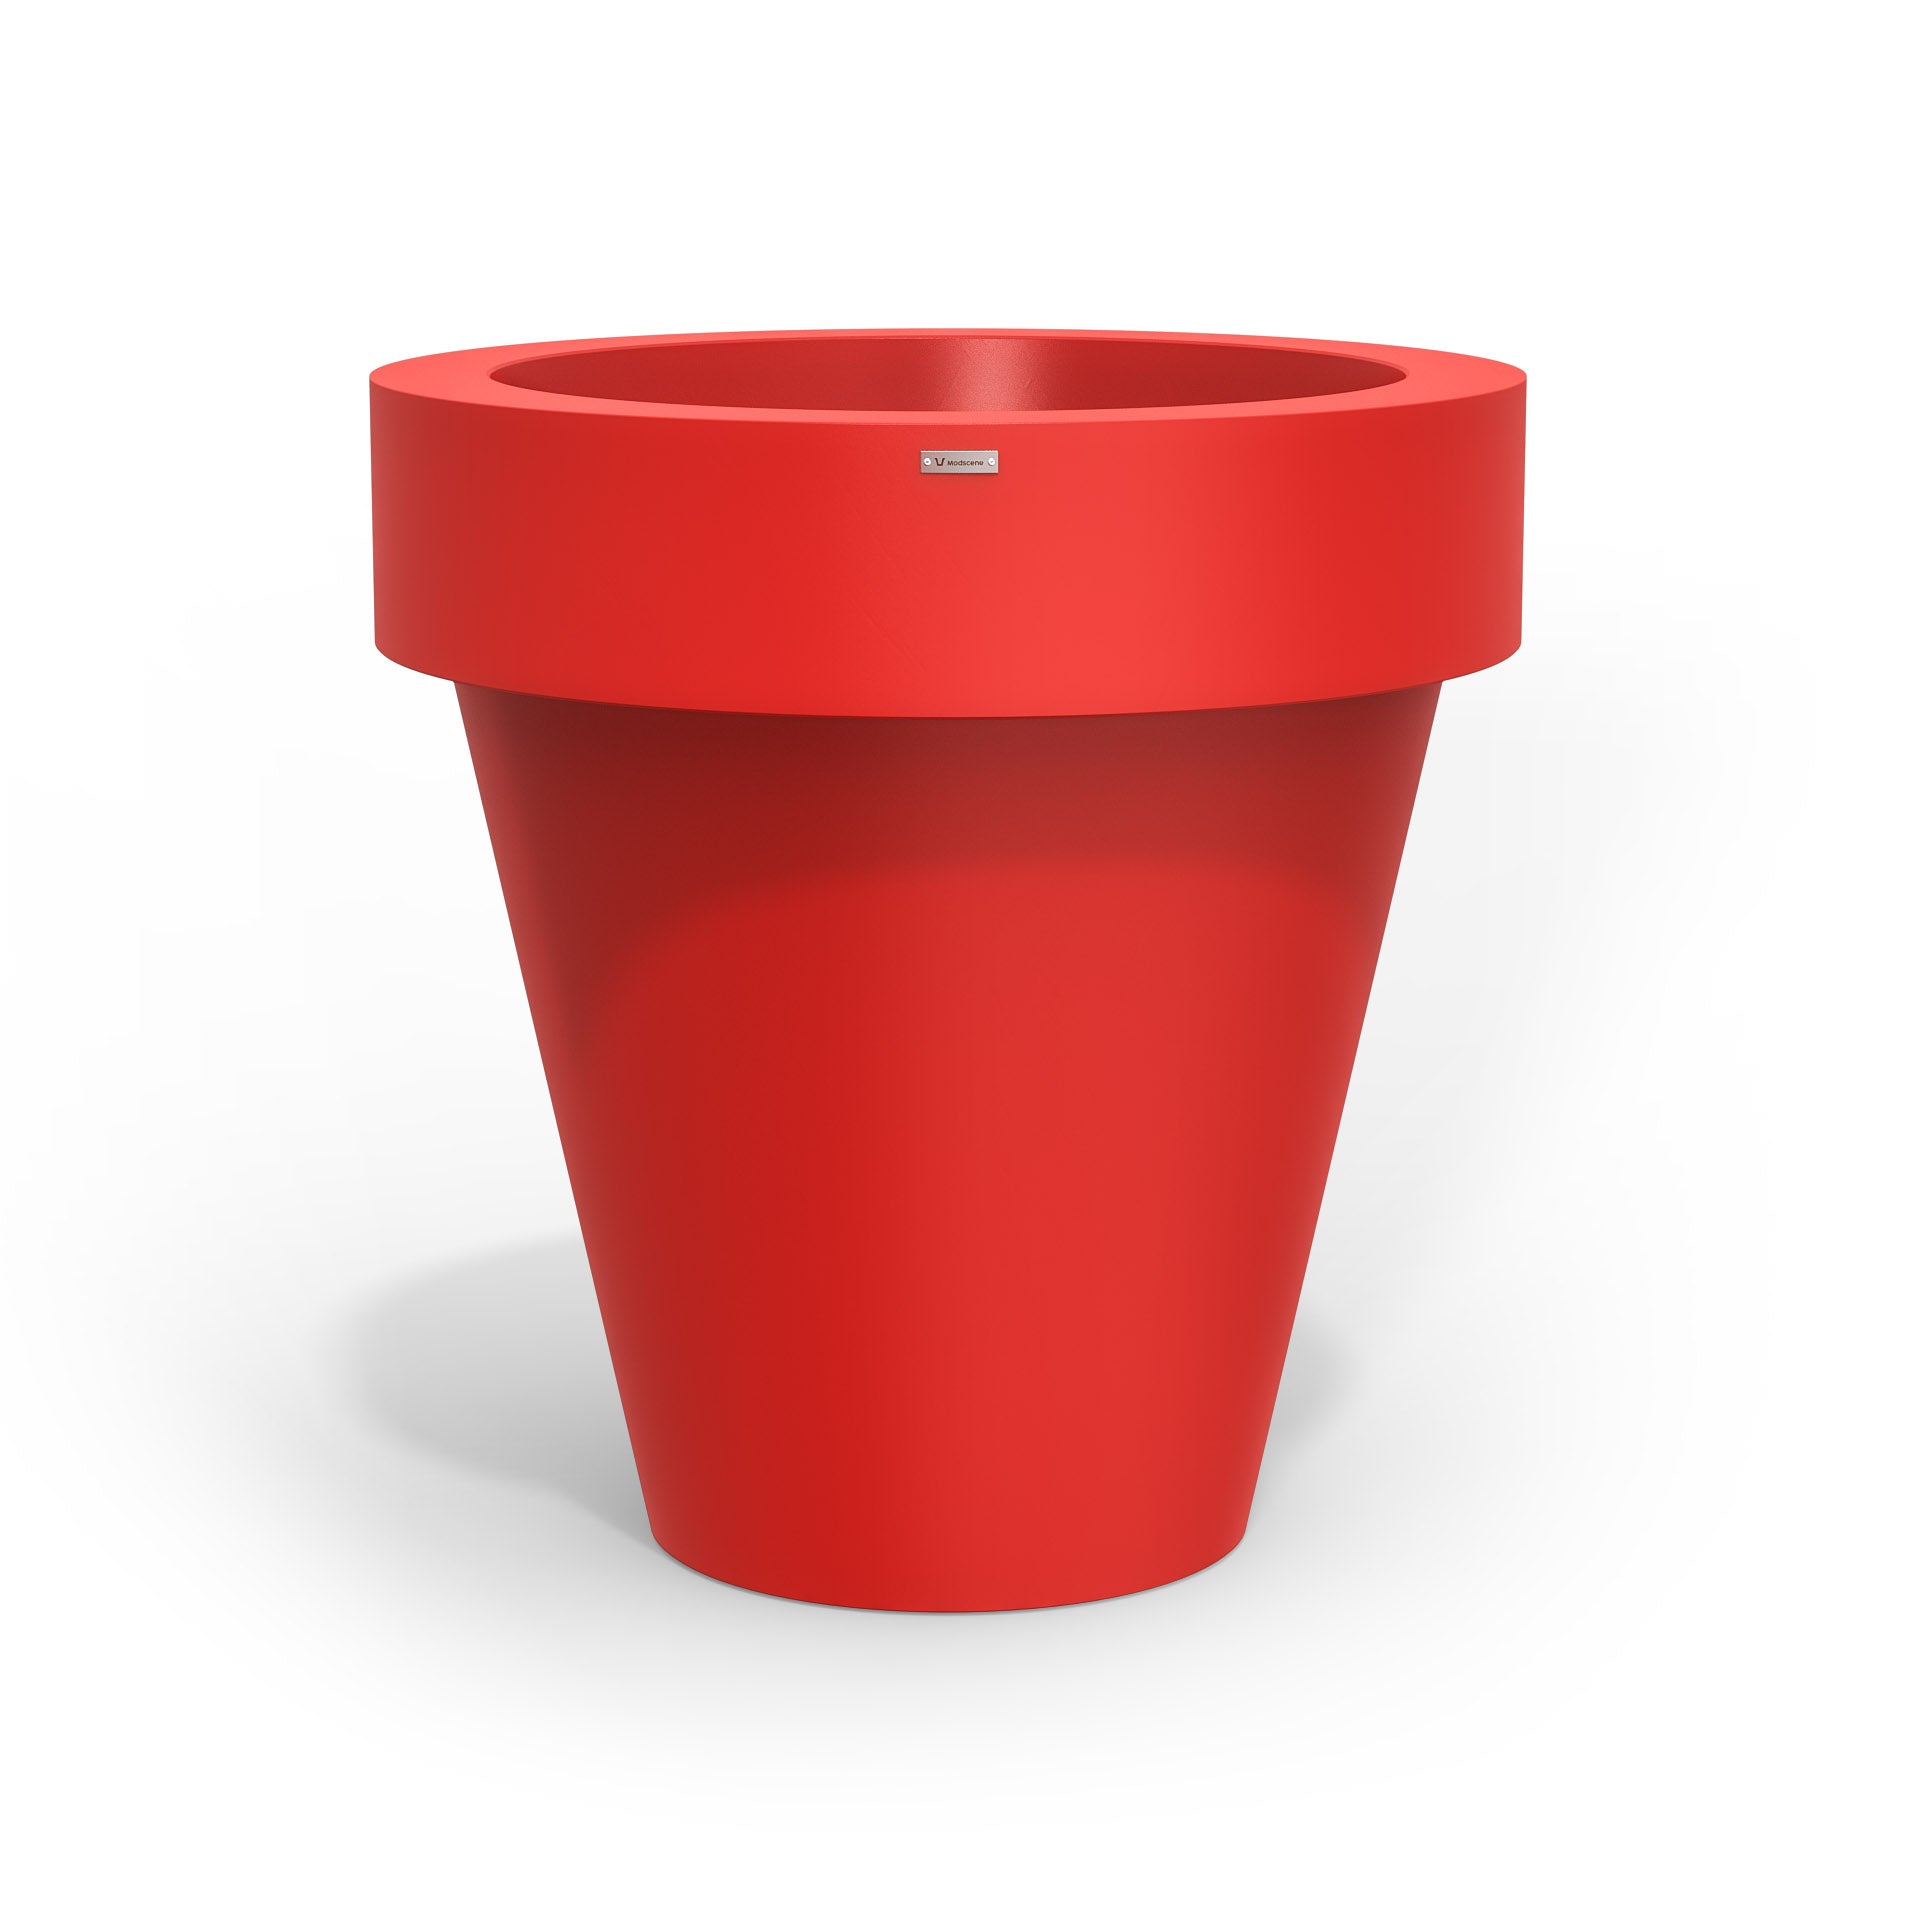 Extra large Modscene planter pot in a red colour. New Zealand made.